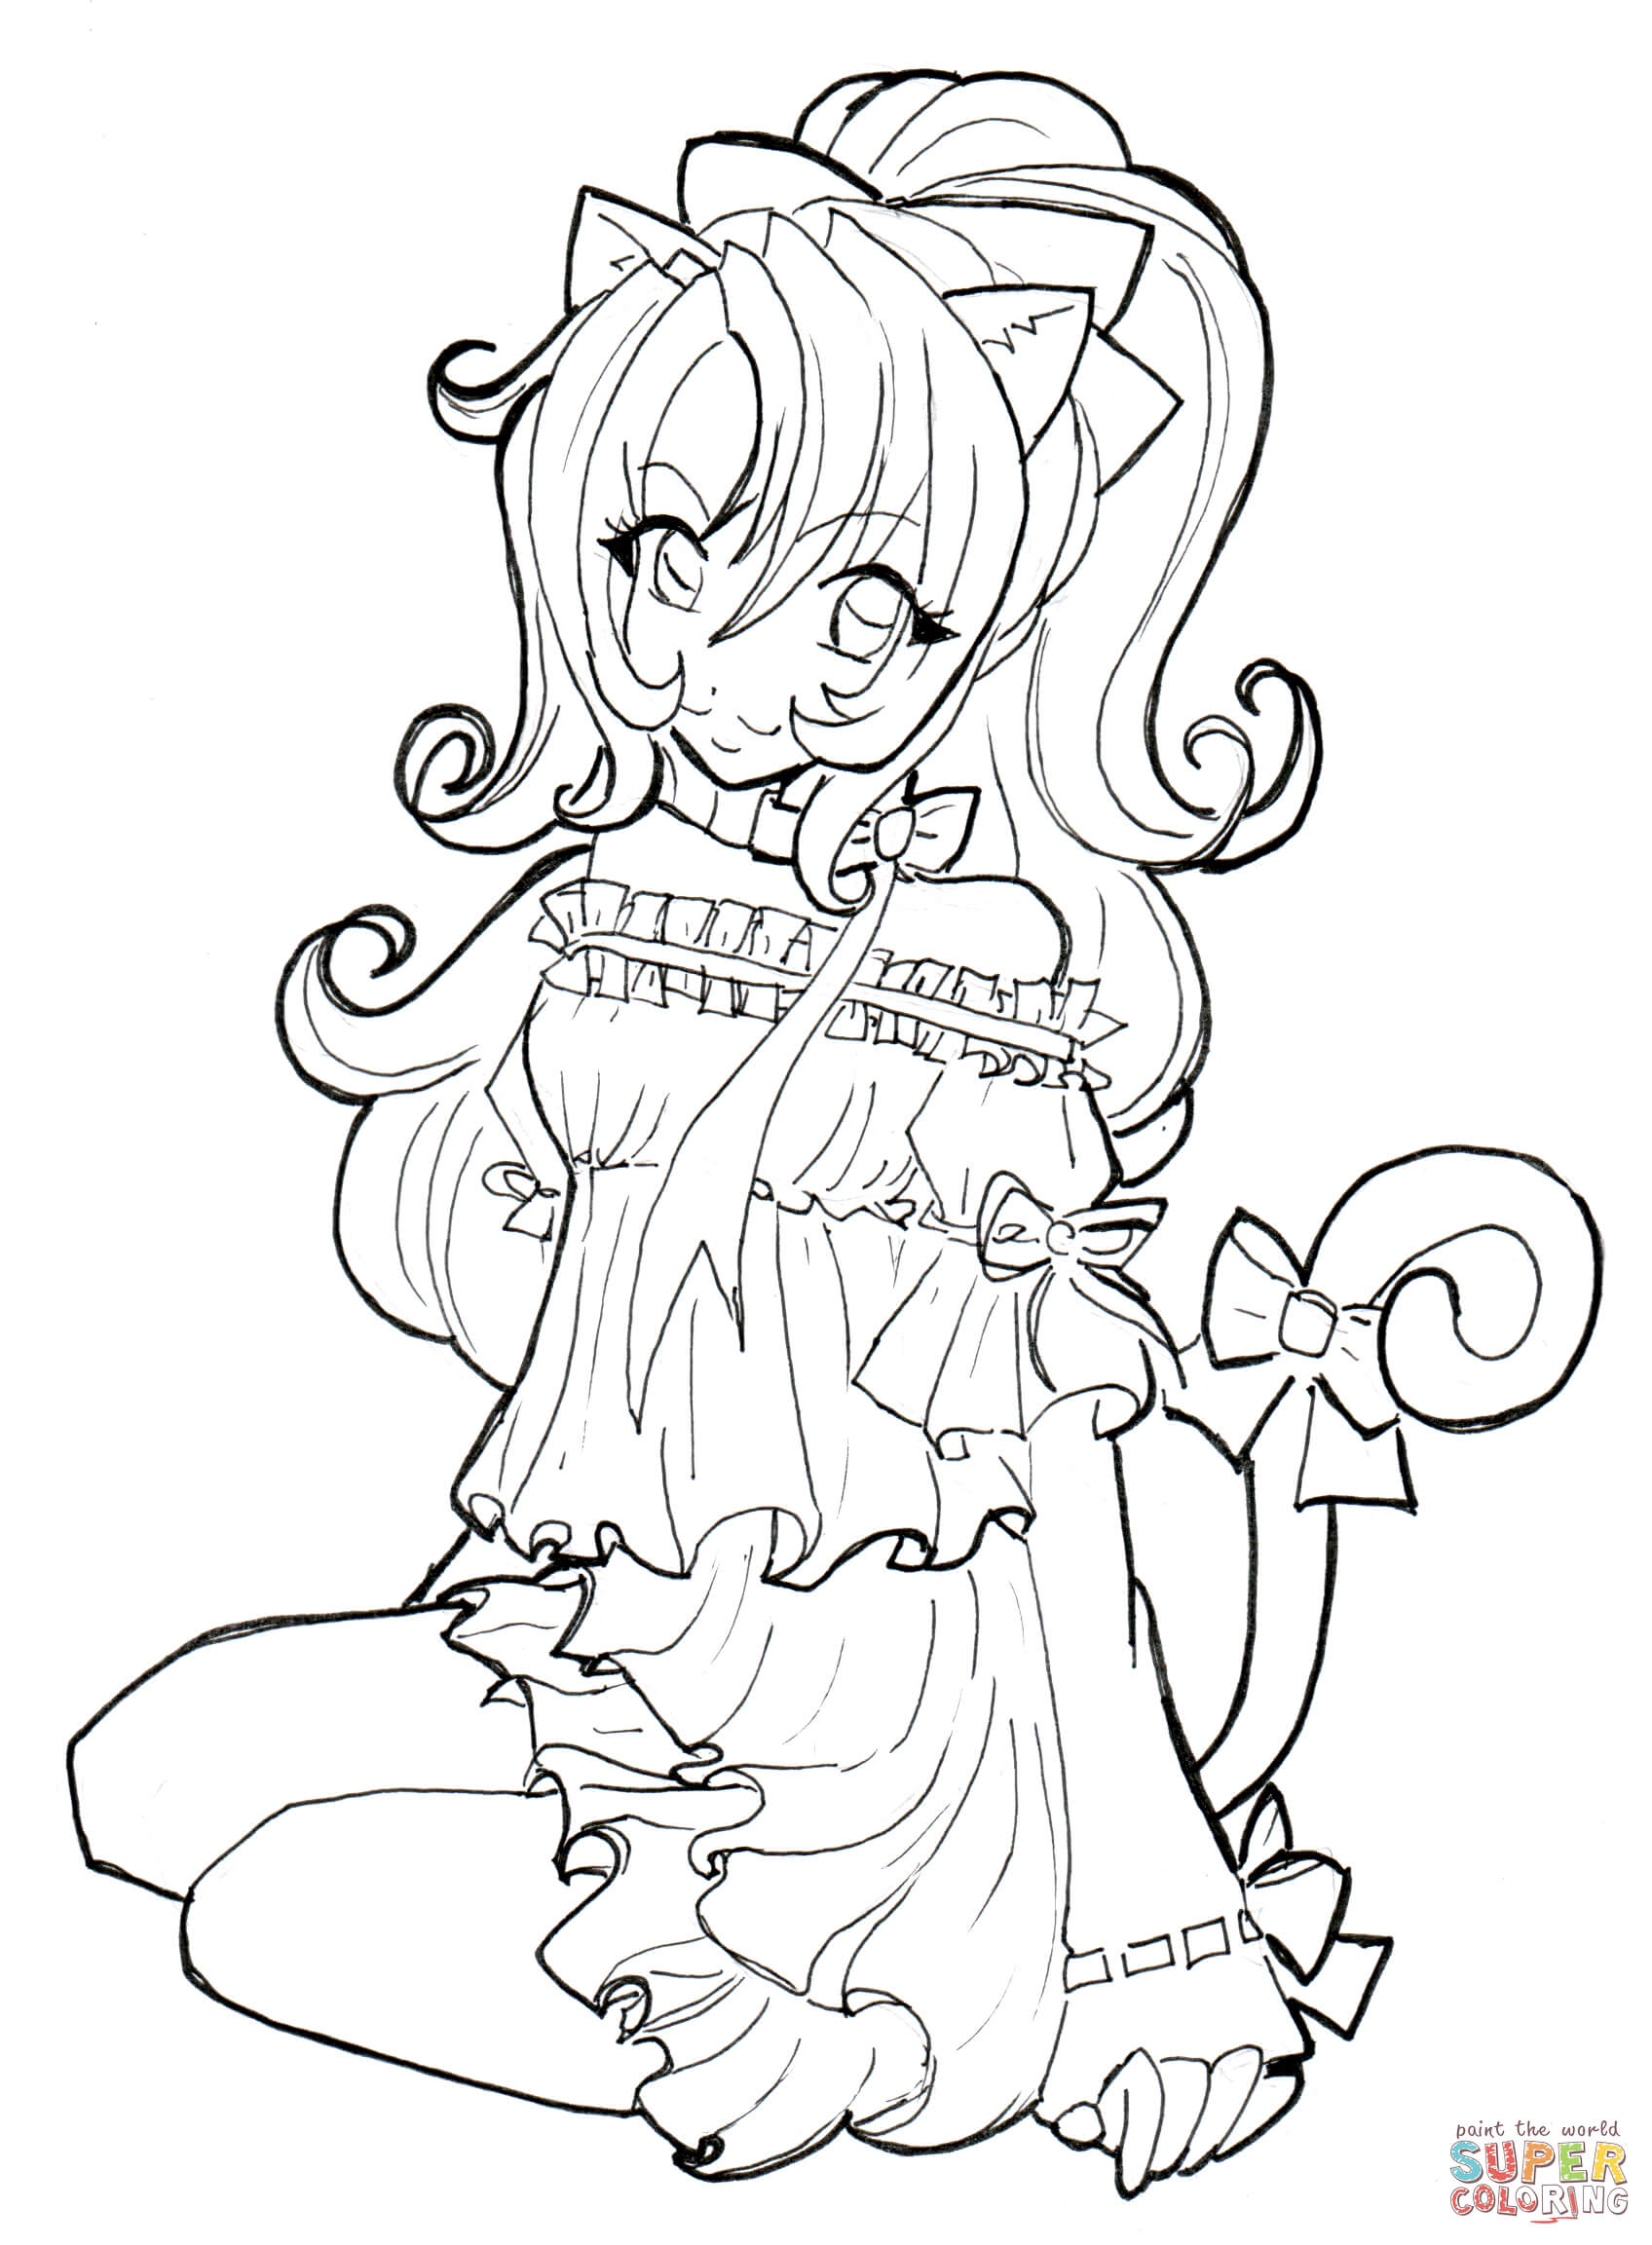 Cat Girl Coloring Page | Free Printable Coloring Pages concernant Ice Angel Coloriage,